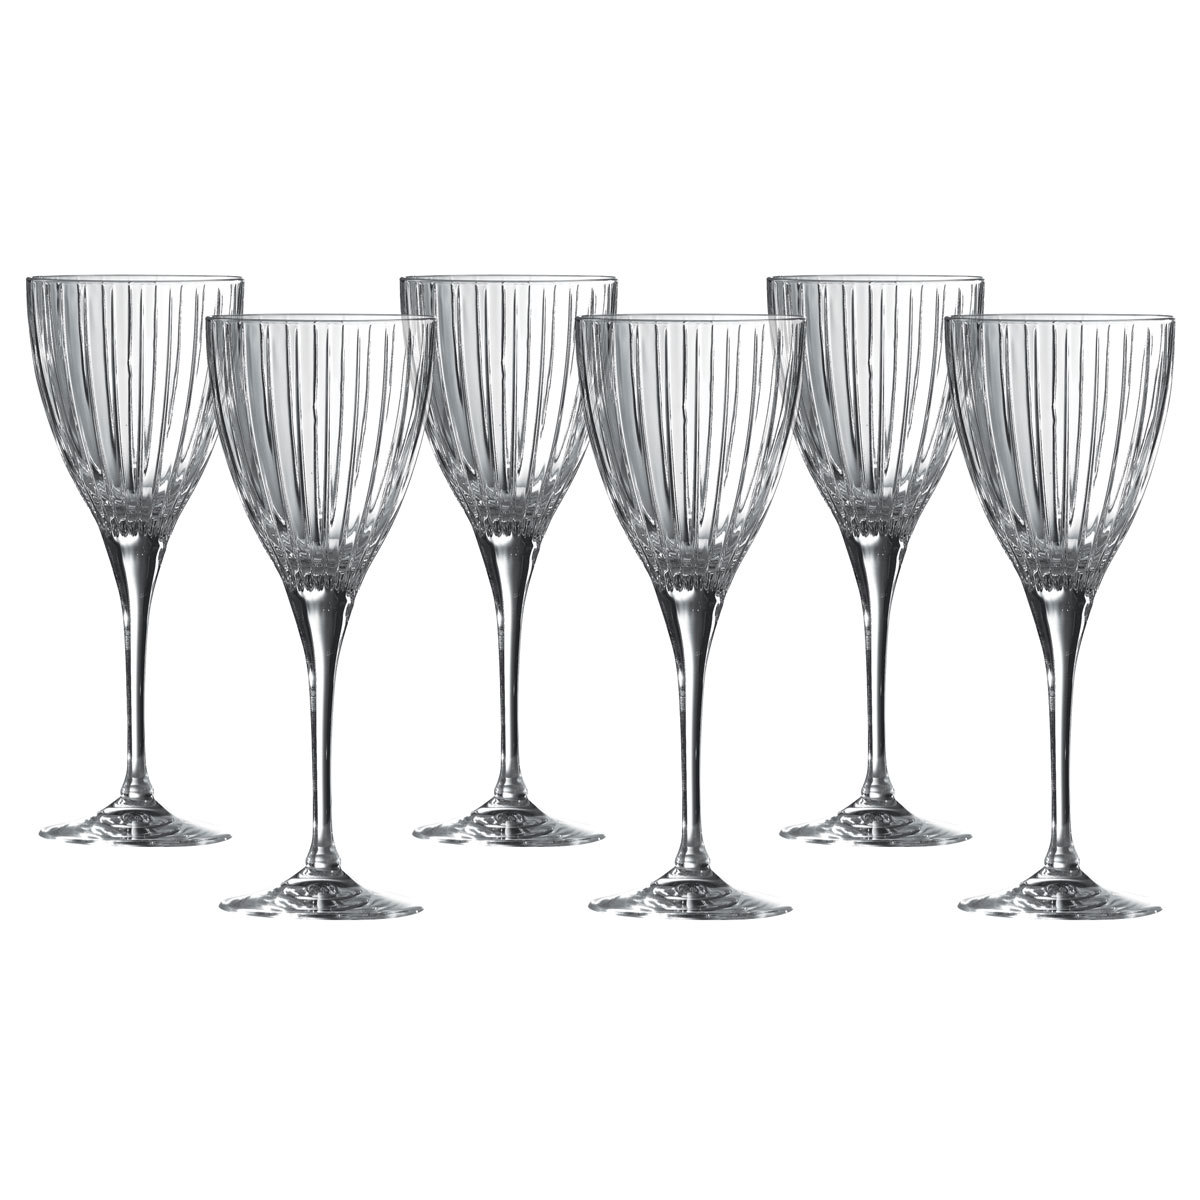 Royal Doulton Linear Crystal Wine Glasses, 6 Pack